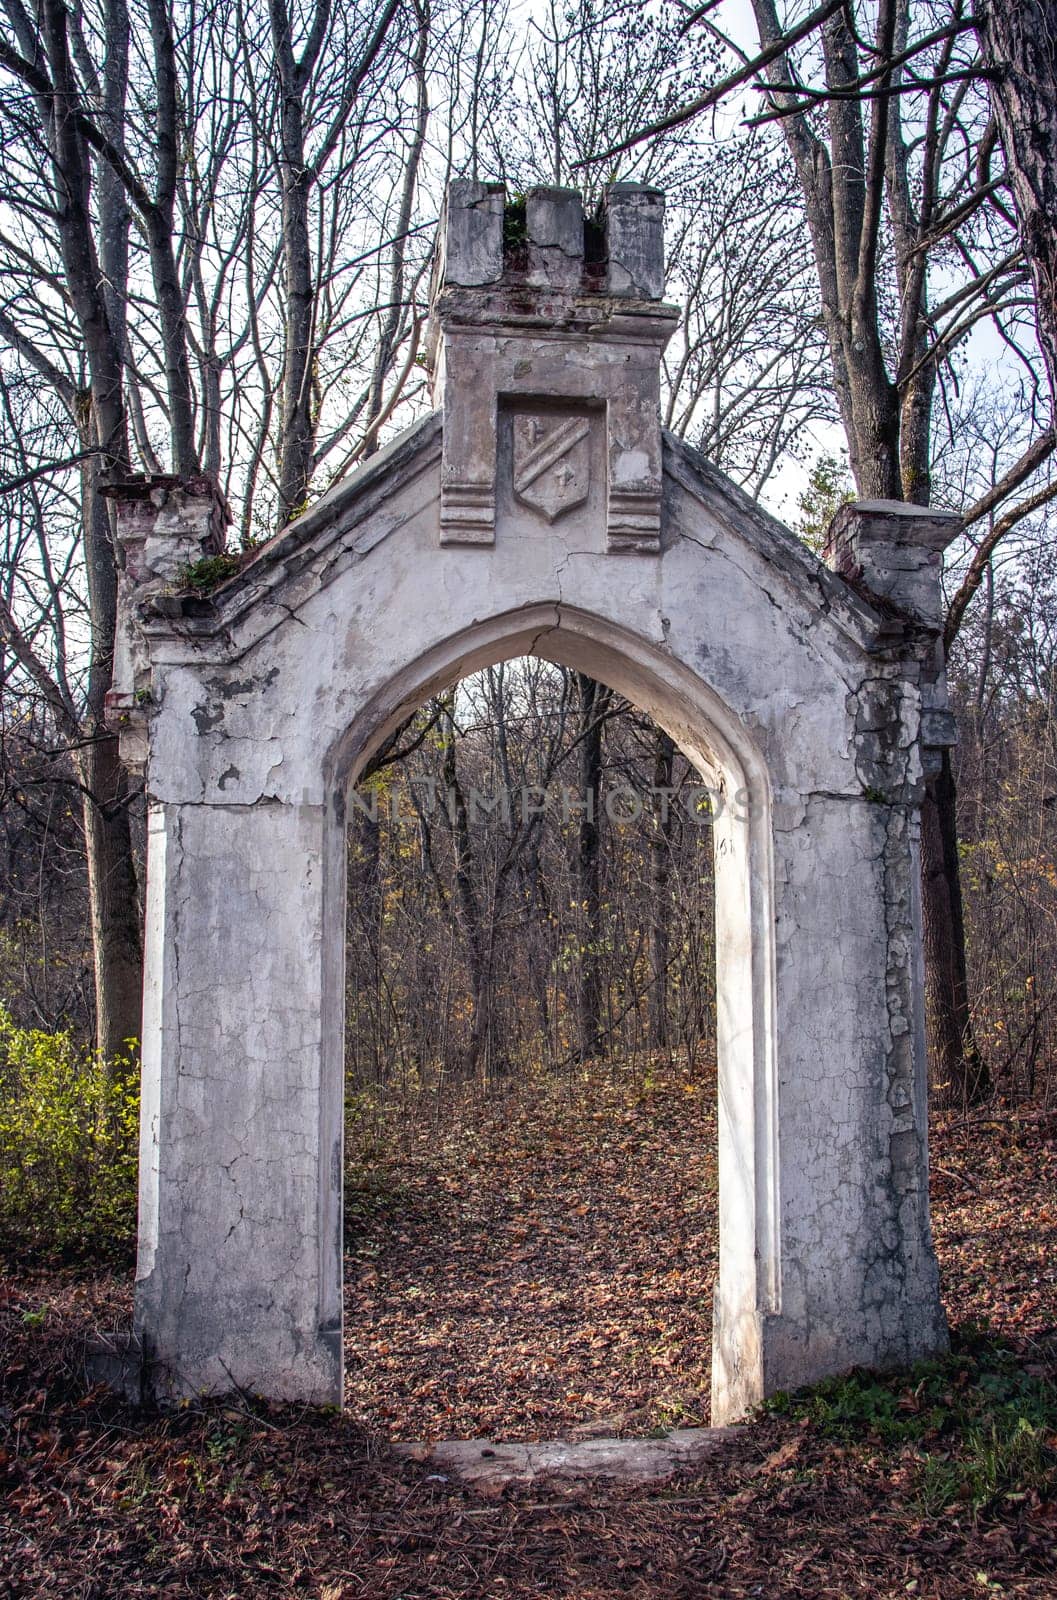 Ancient stronghold entrance ruin concept photo. Parkland overlooking from the yard. Damaged tower view. Architectural detail of ruined buildings. Ukrainian moldings. High quality picture for wallpaper, travel blog.